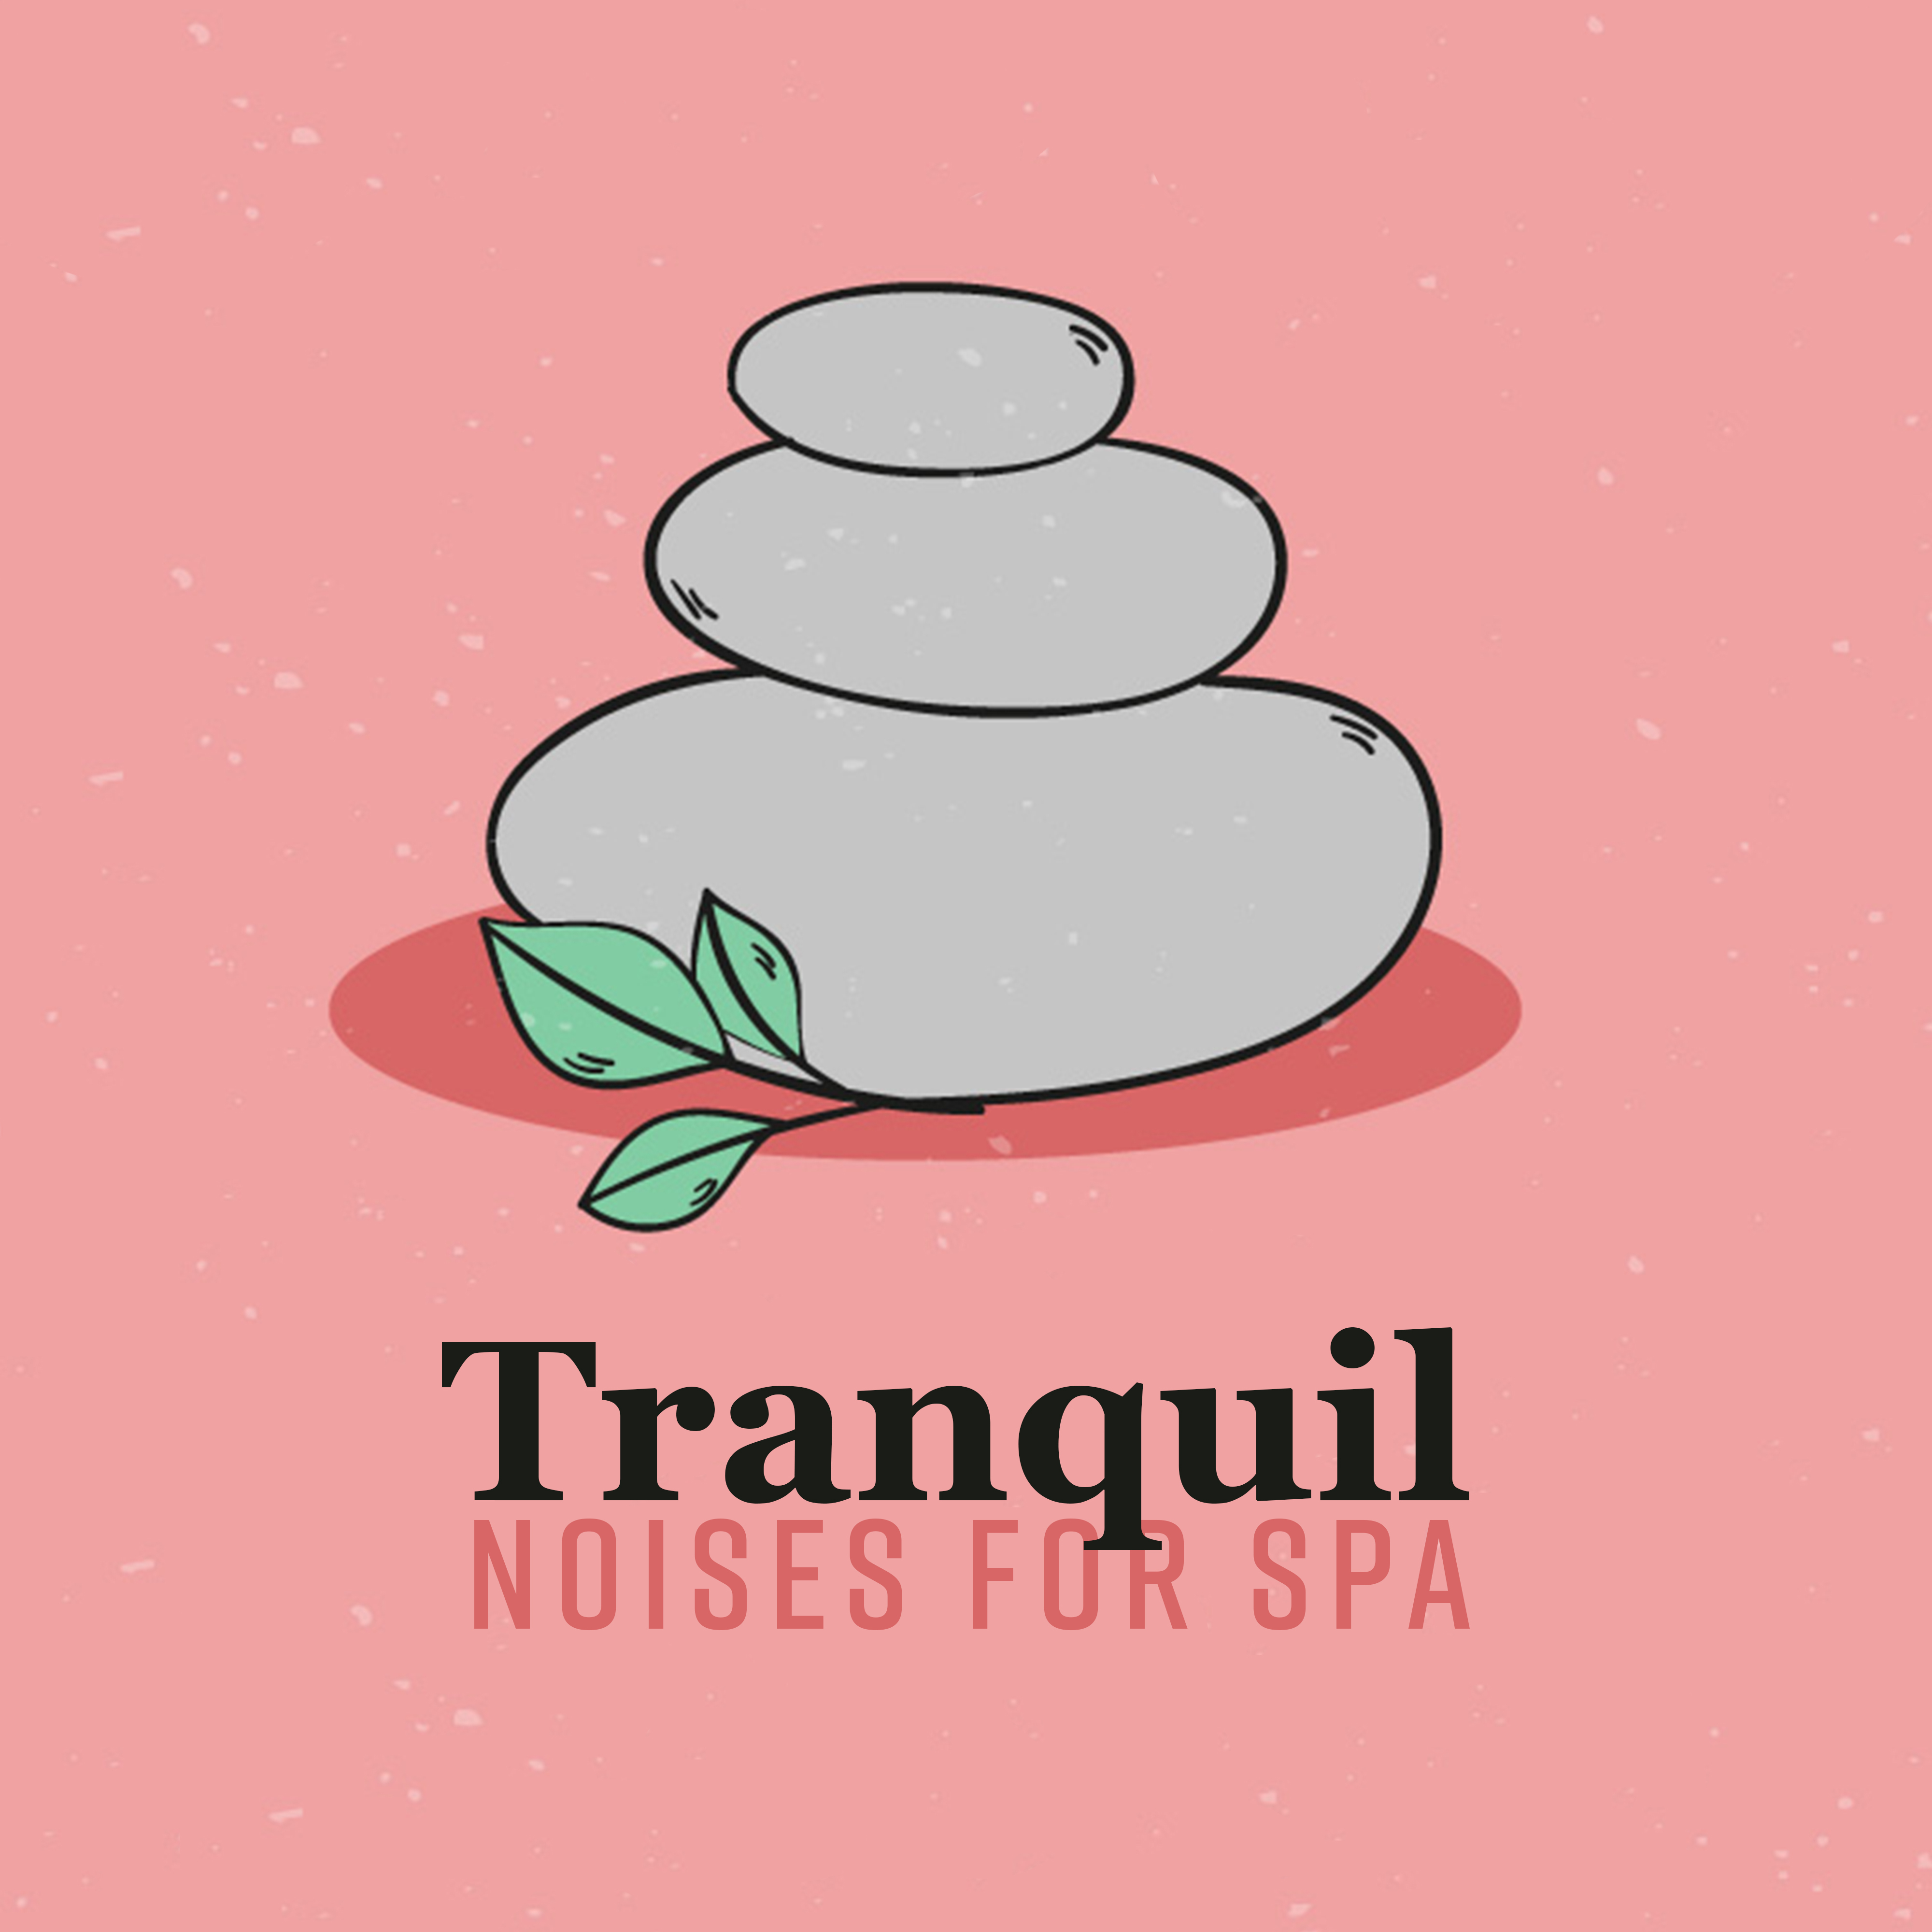 Tranquil Noises for Spa